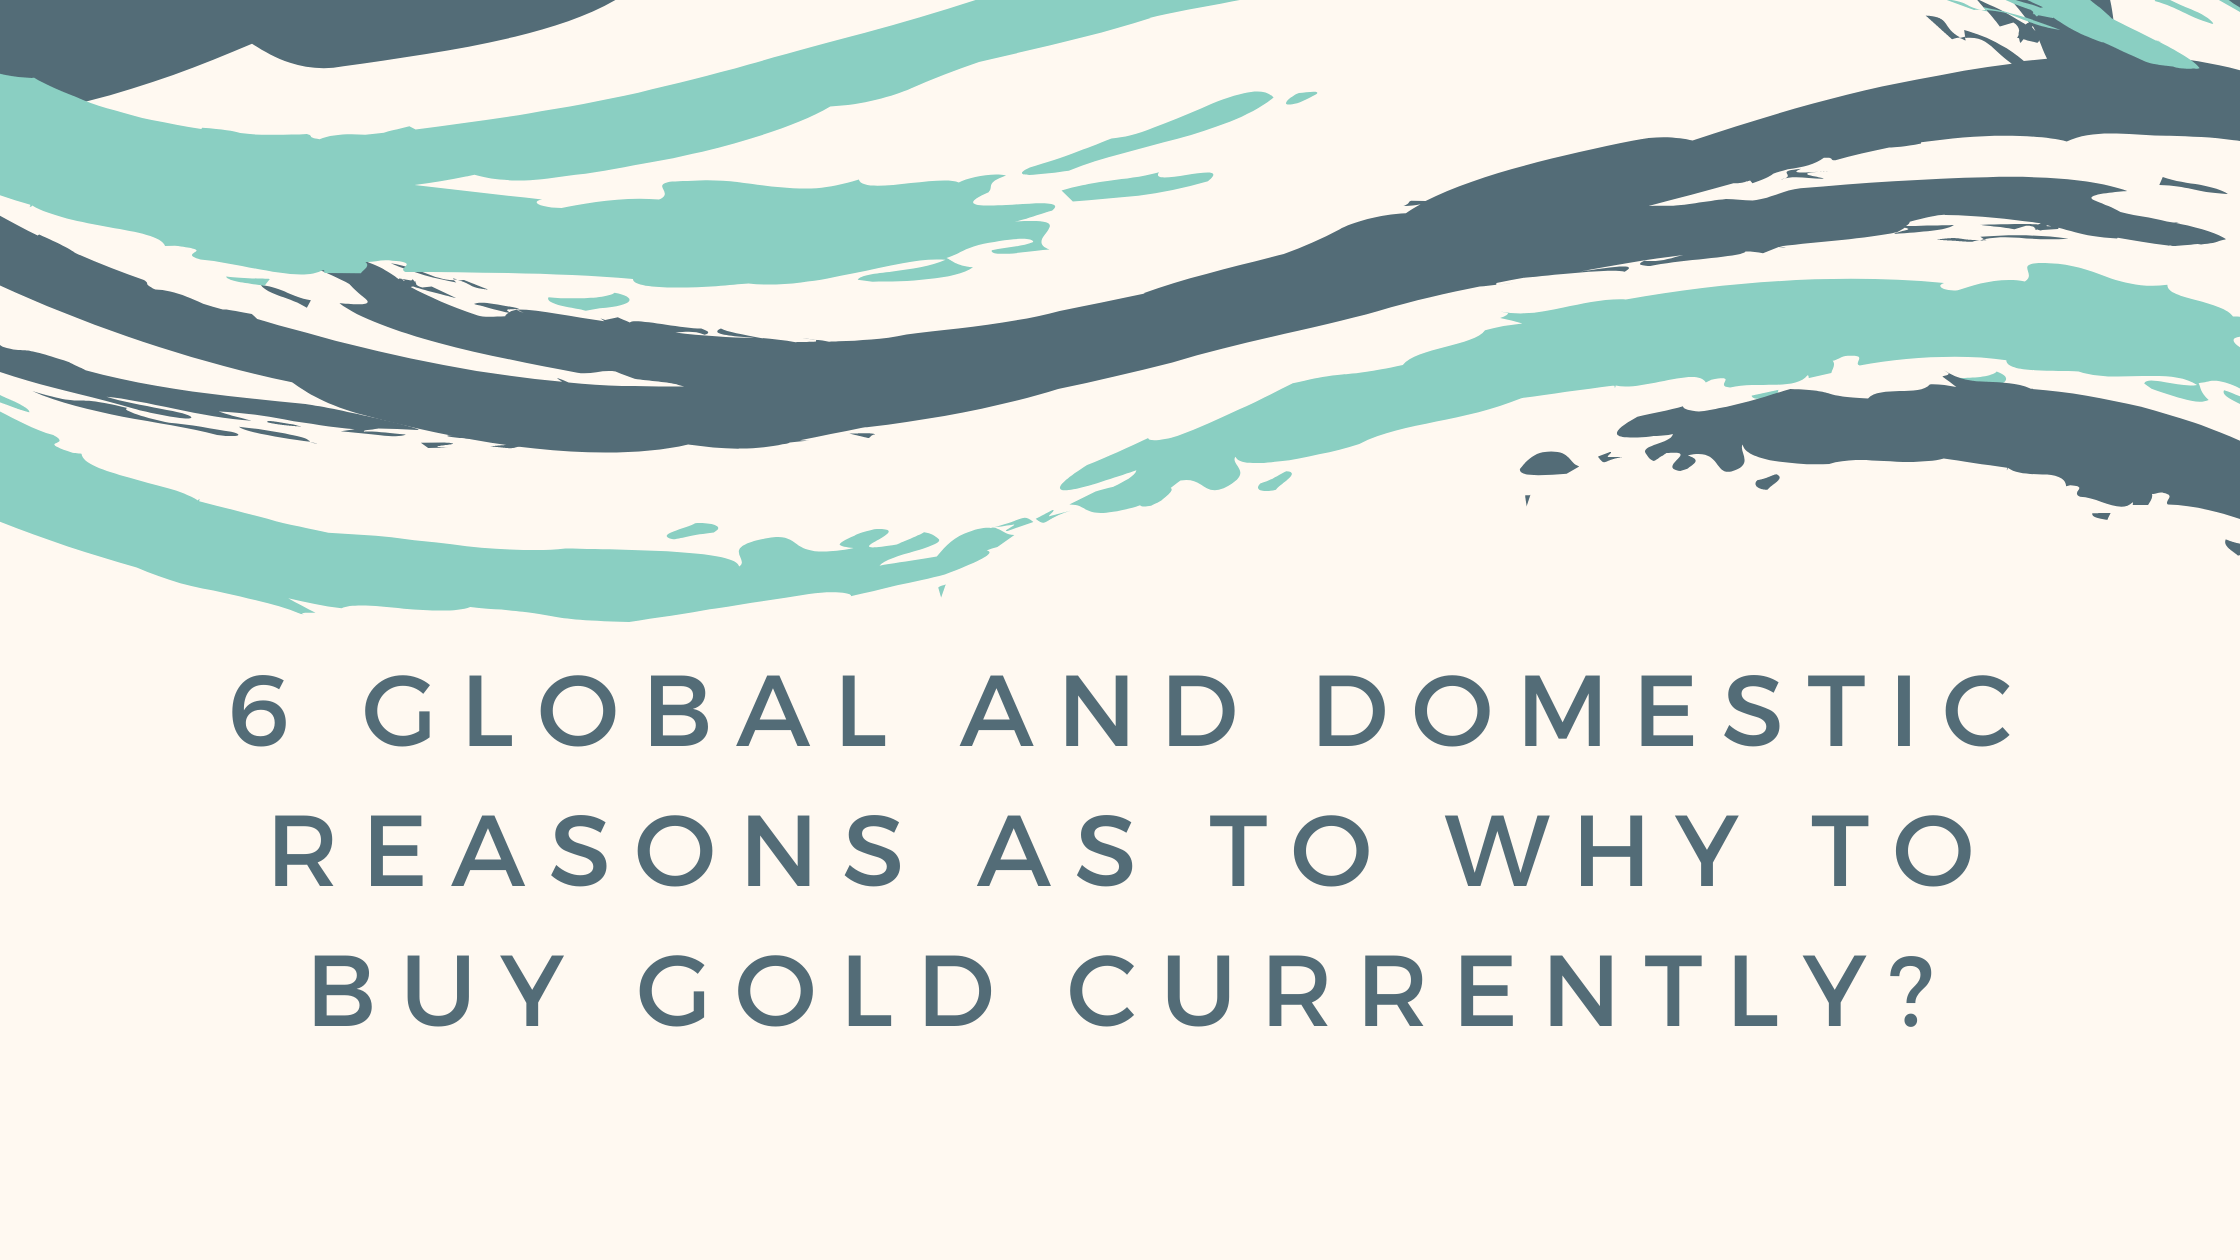 Reasons to Buy Gold Currently